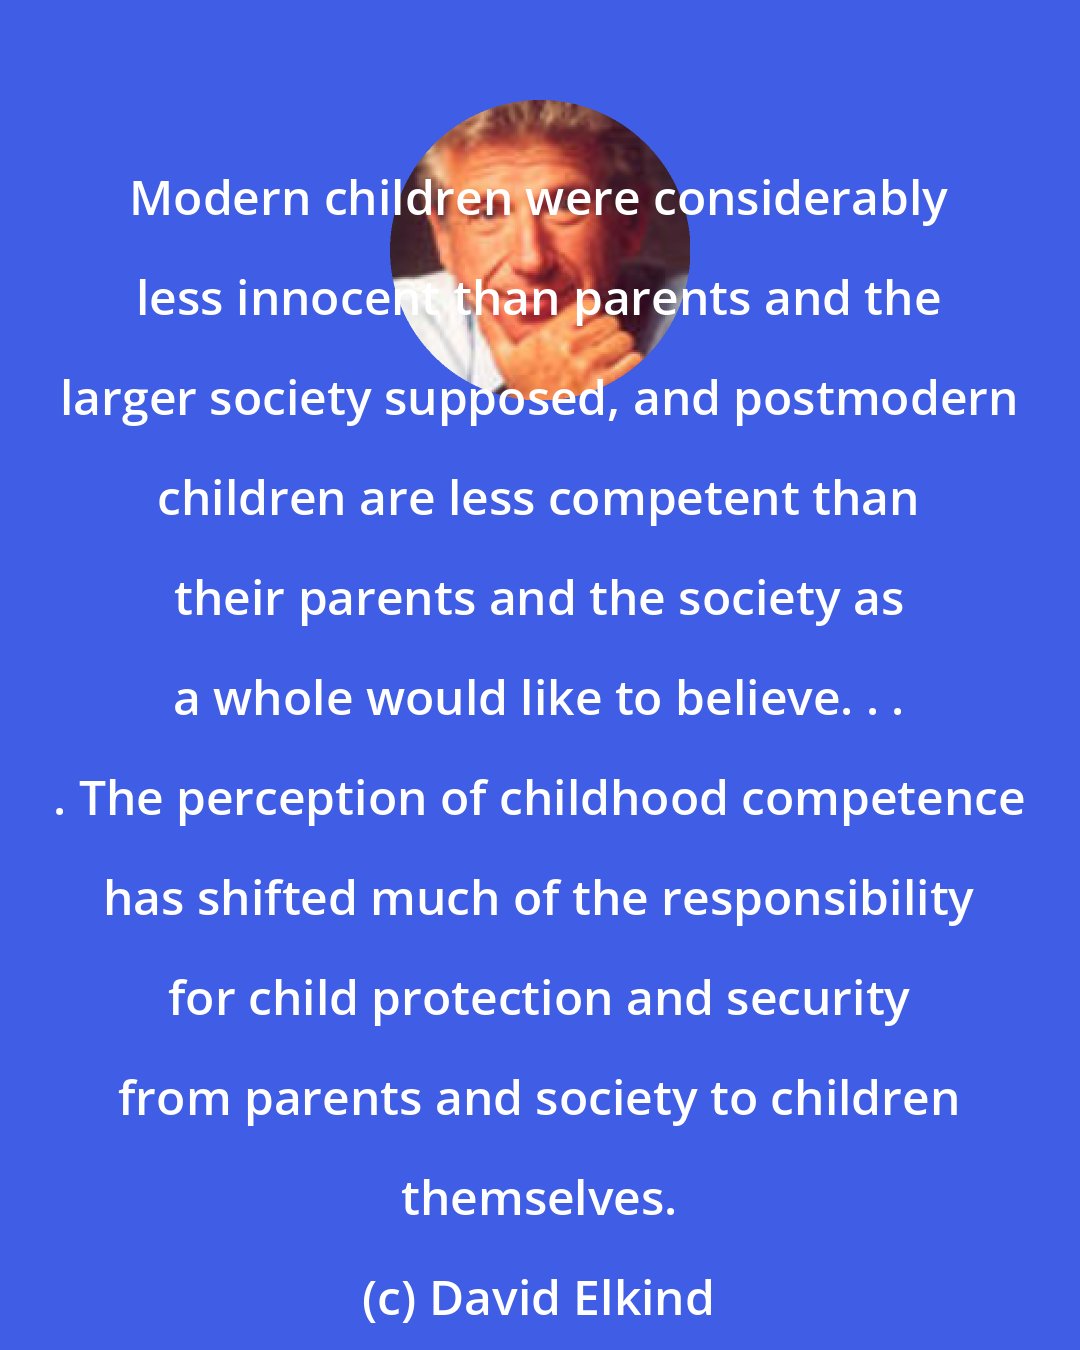 David Elkind: Modern children were considerably less innocent than parents and the larger society supposed, and postmodern children are less competent than their parents and the society as a whole would like to believe. . . . The perception of childhood competence has shifted much of the responsibility for child protection and security from parents and society to children themselves.